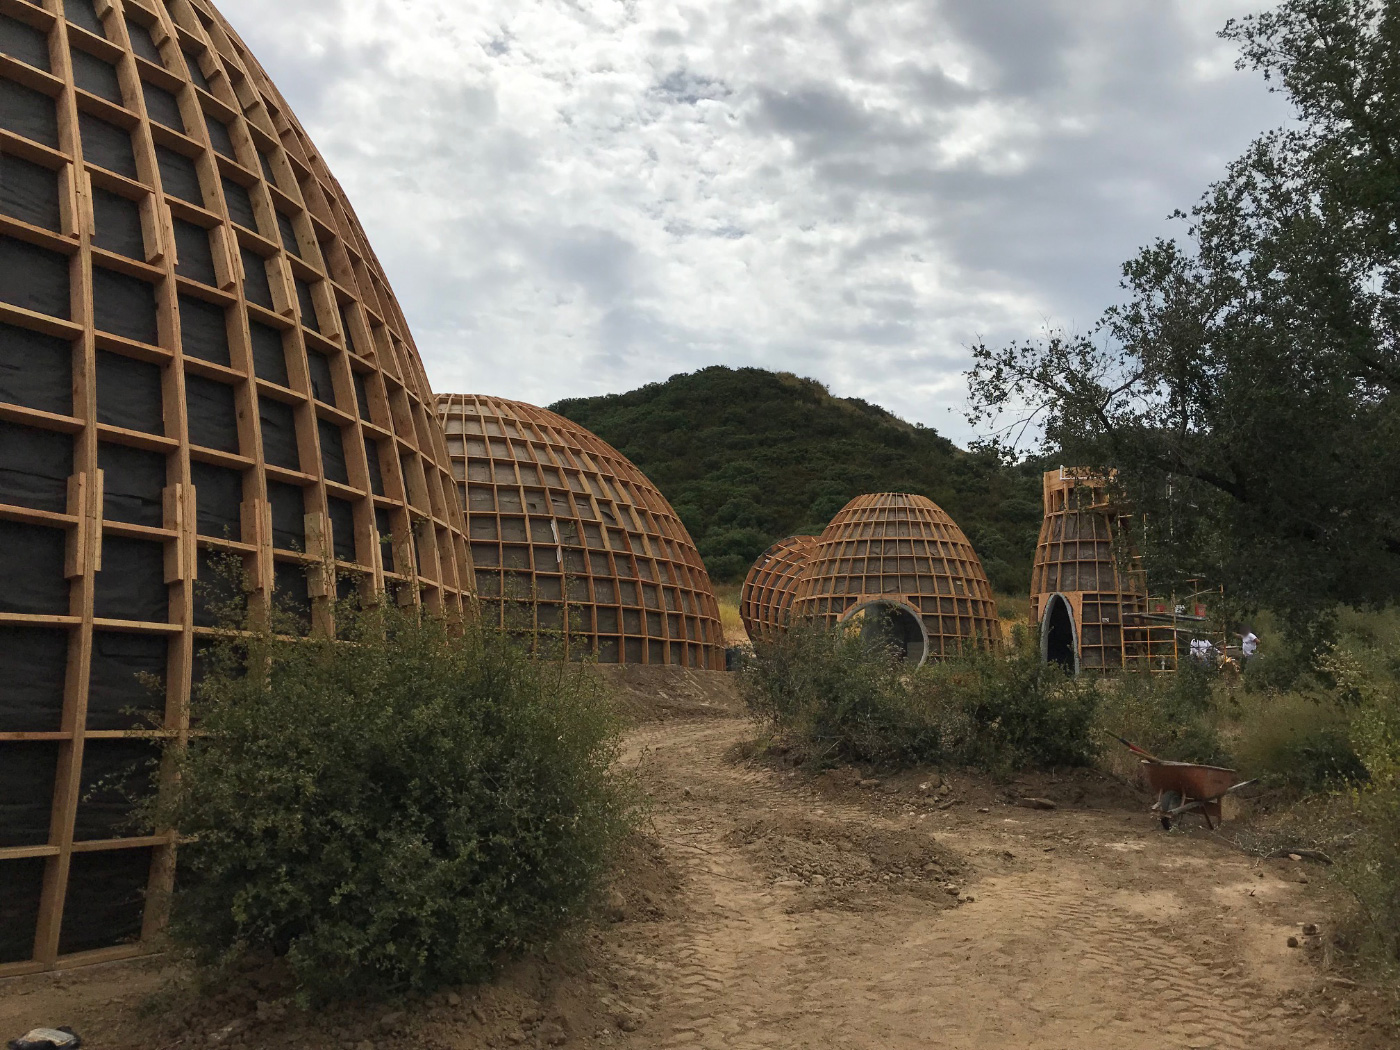 Photos of the Kanye West-designed wooden dome homes